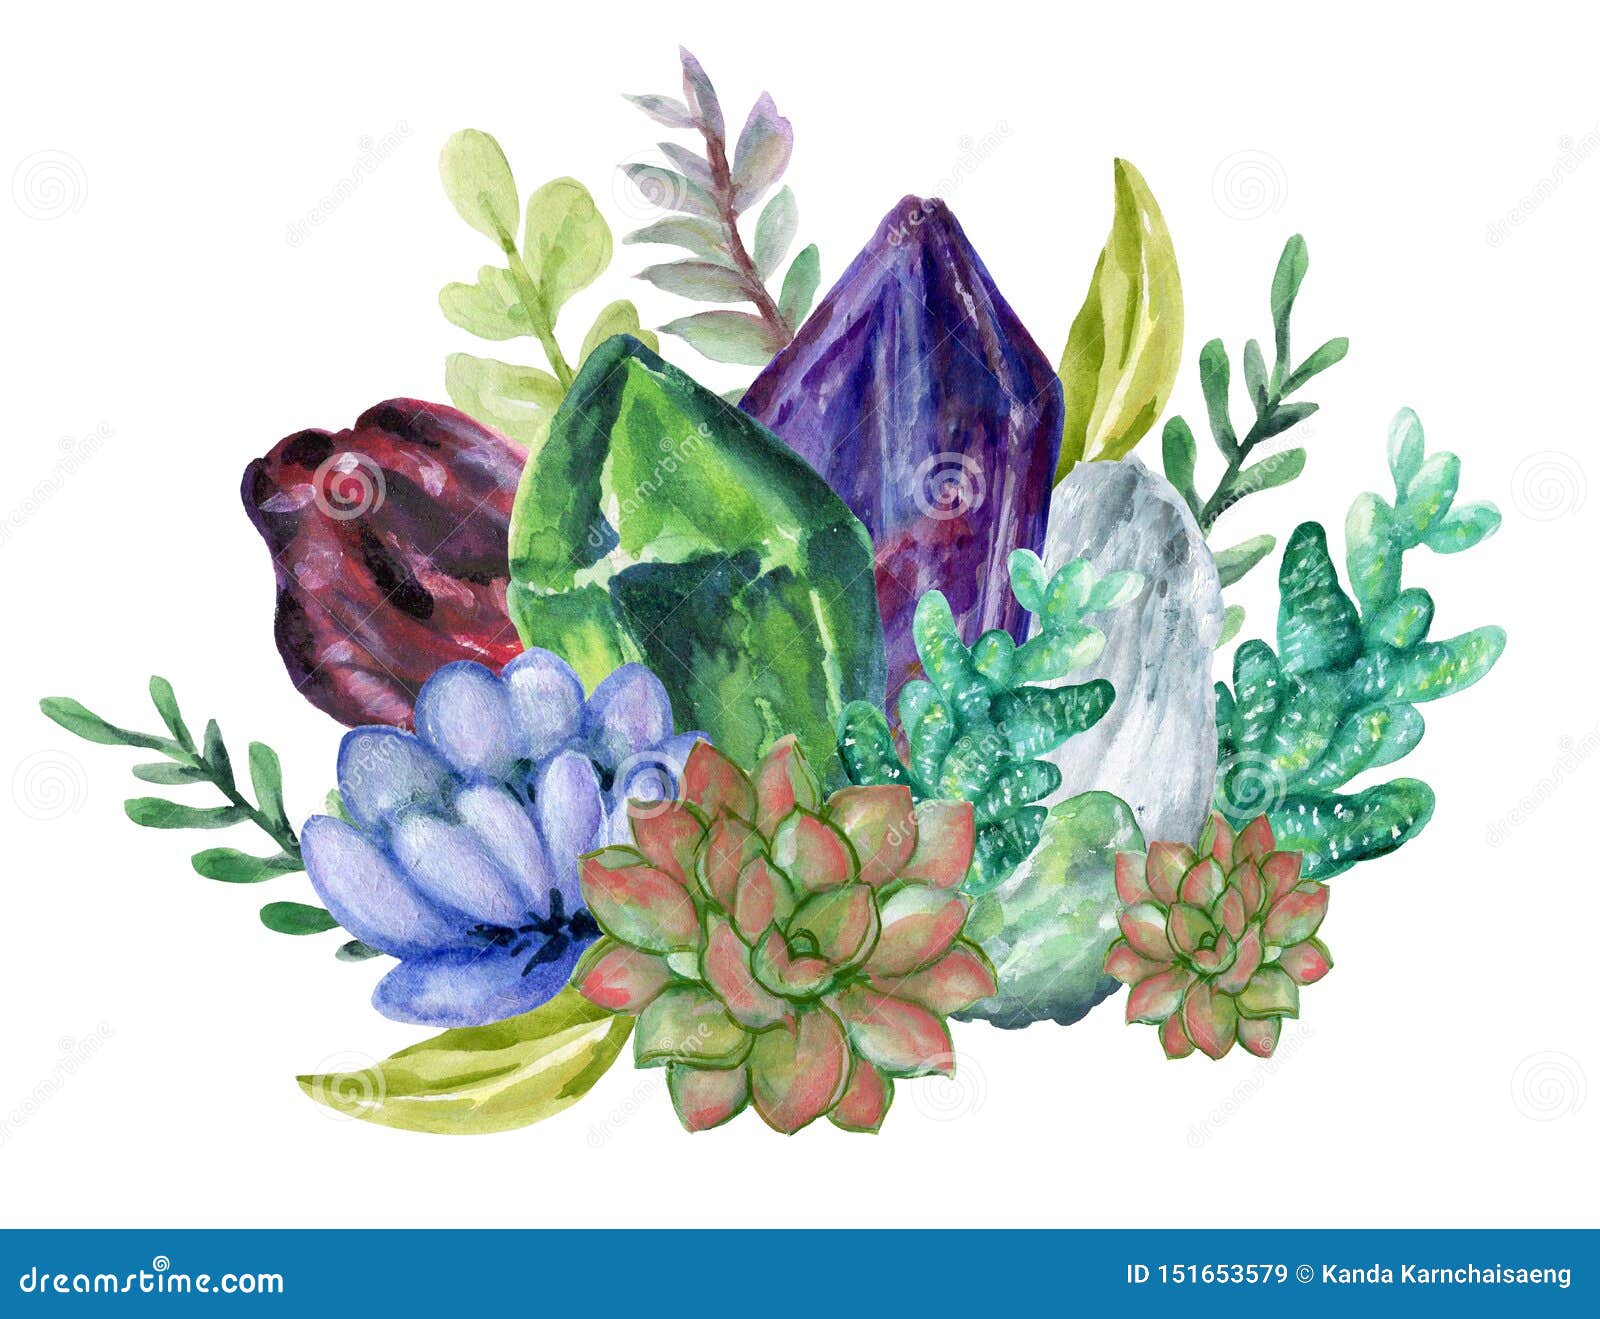 watercolor gouache elegant vintage crystal stone and gemstones with flower succulants and foliage leaf bouquet wreath hand painted